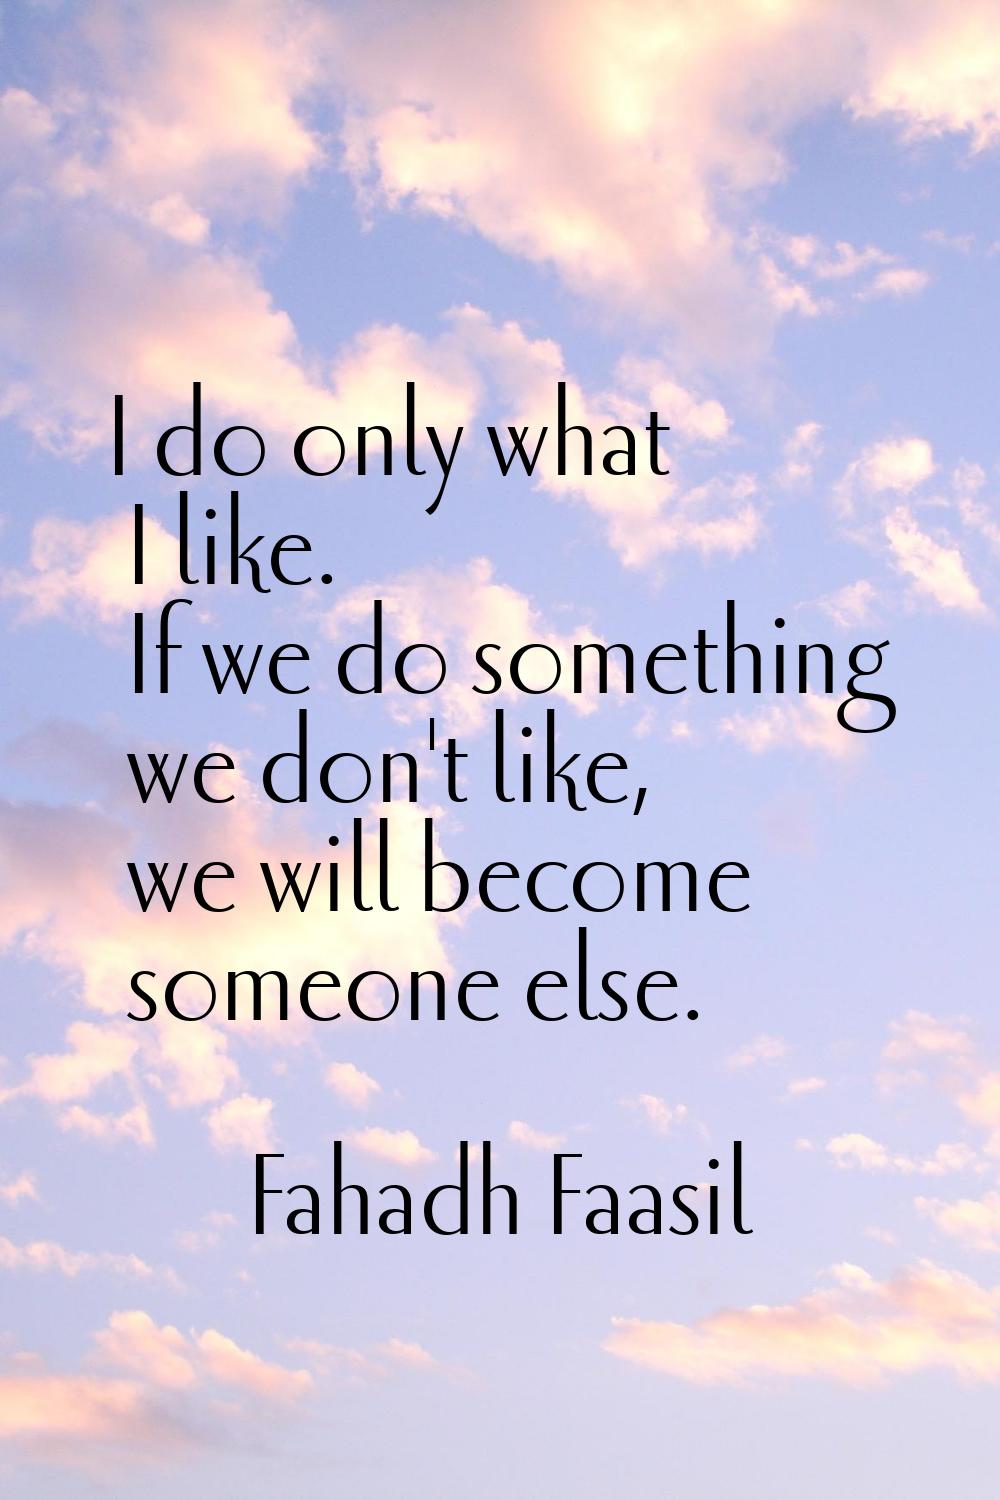 I do only what I like. If we do something we don't like, we will become someone else.